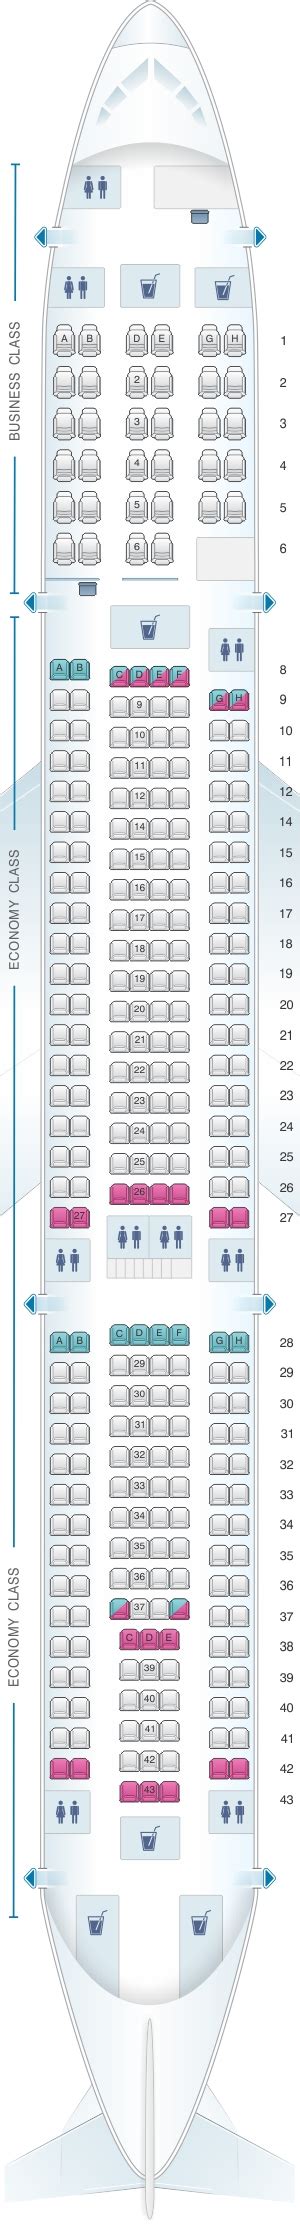 8 Images Airbus A330 200 Seating Plan Air Mauritius And Description